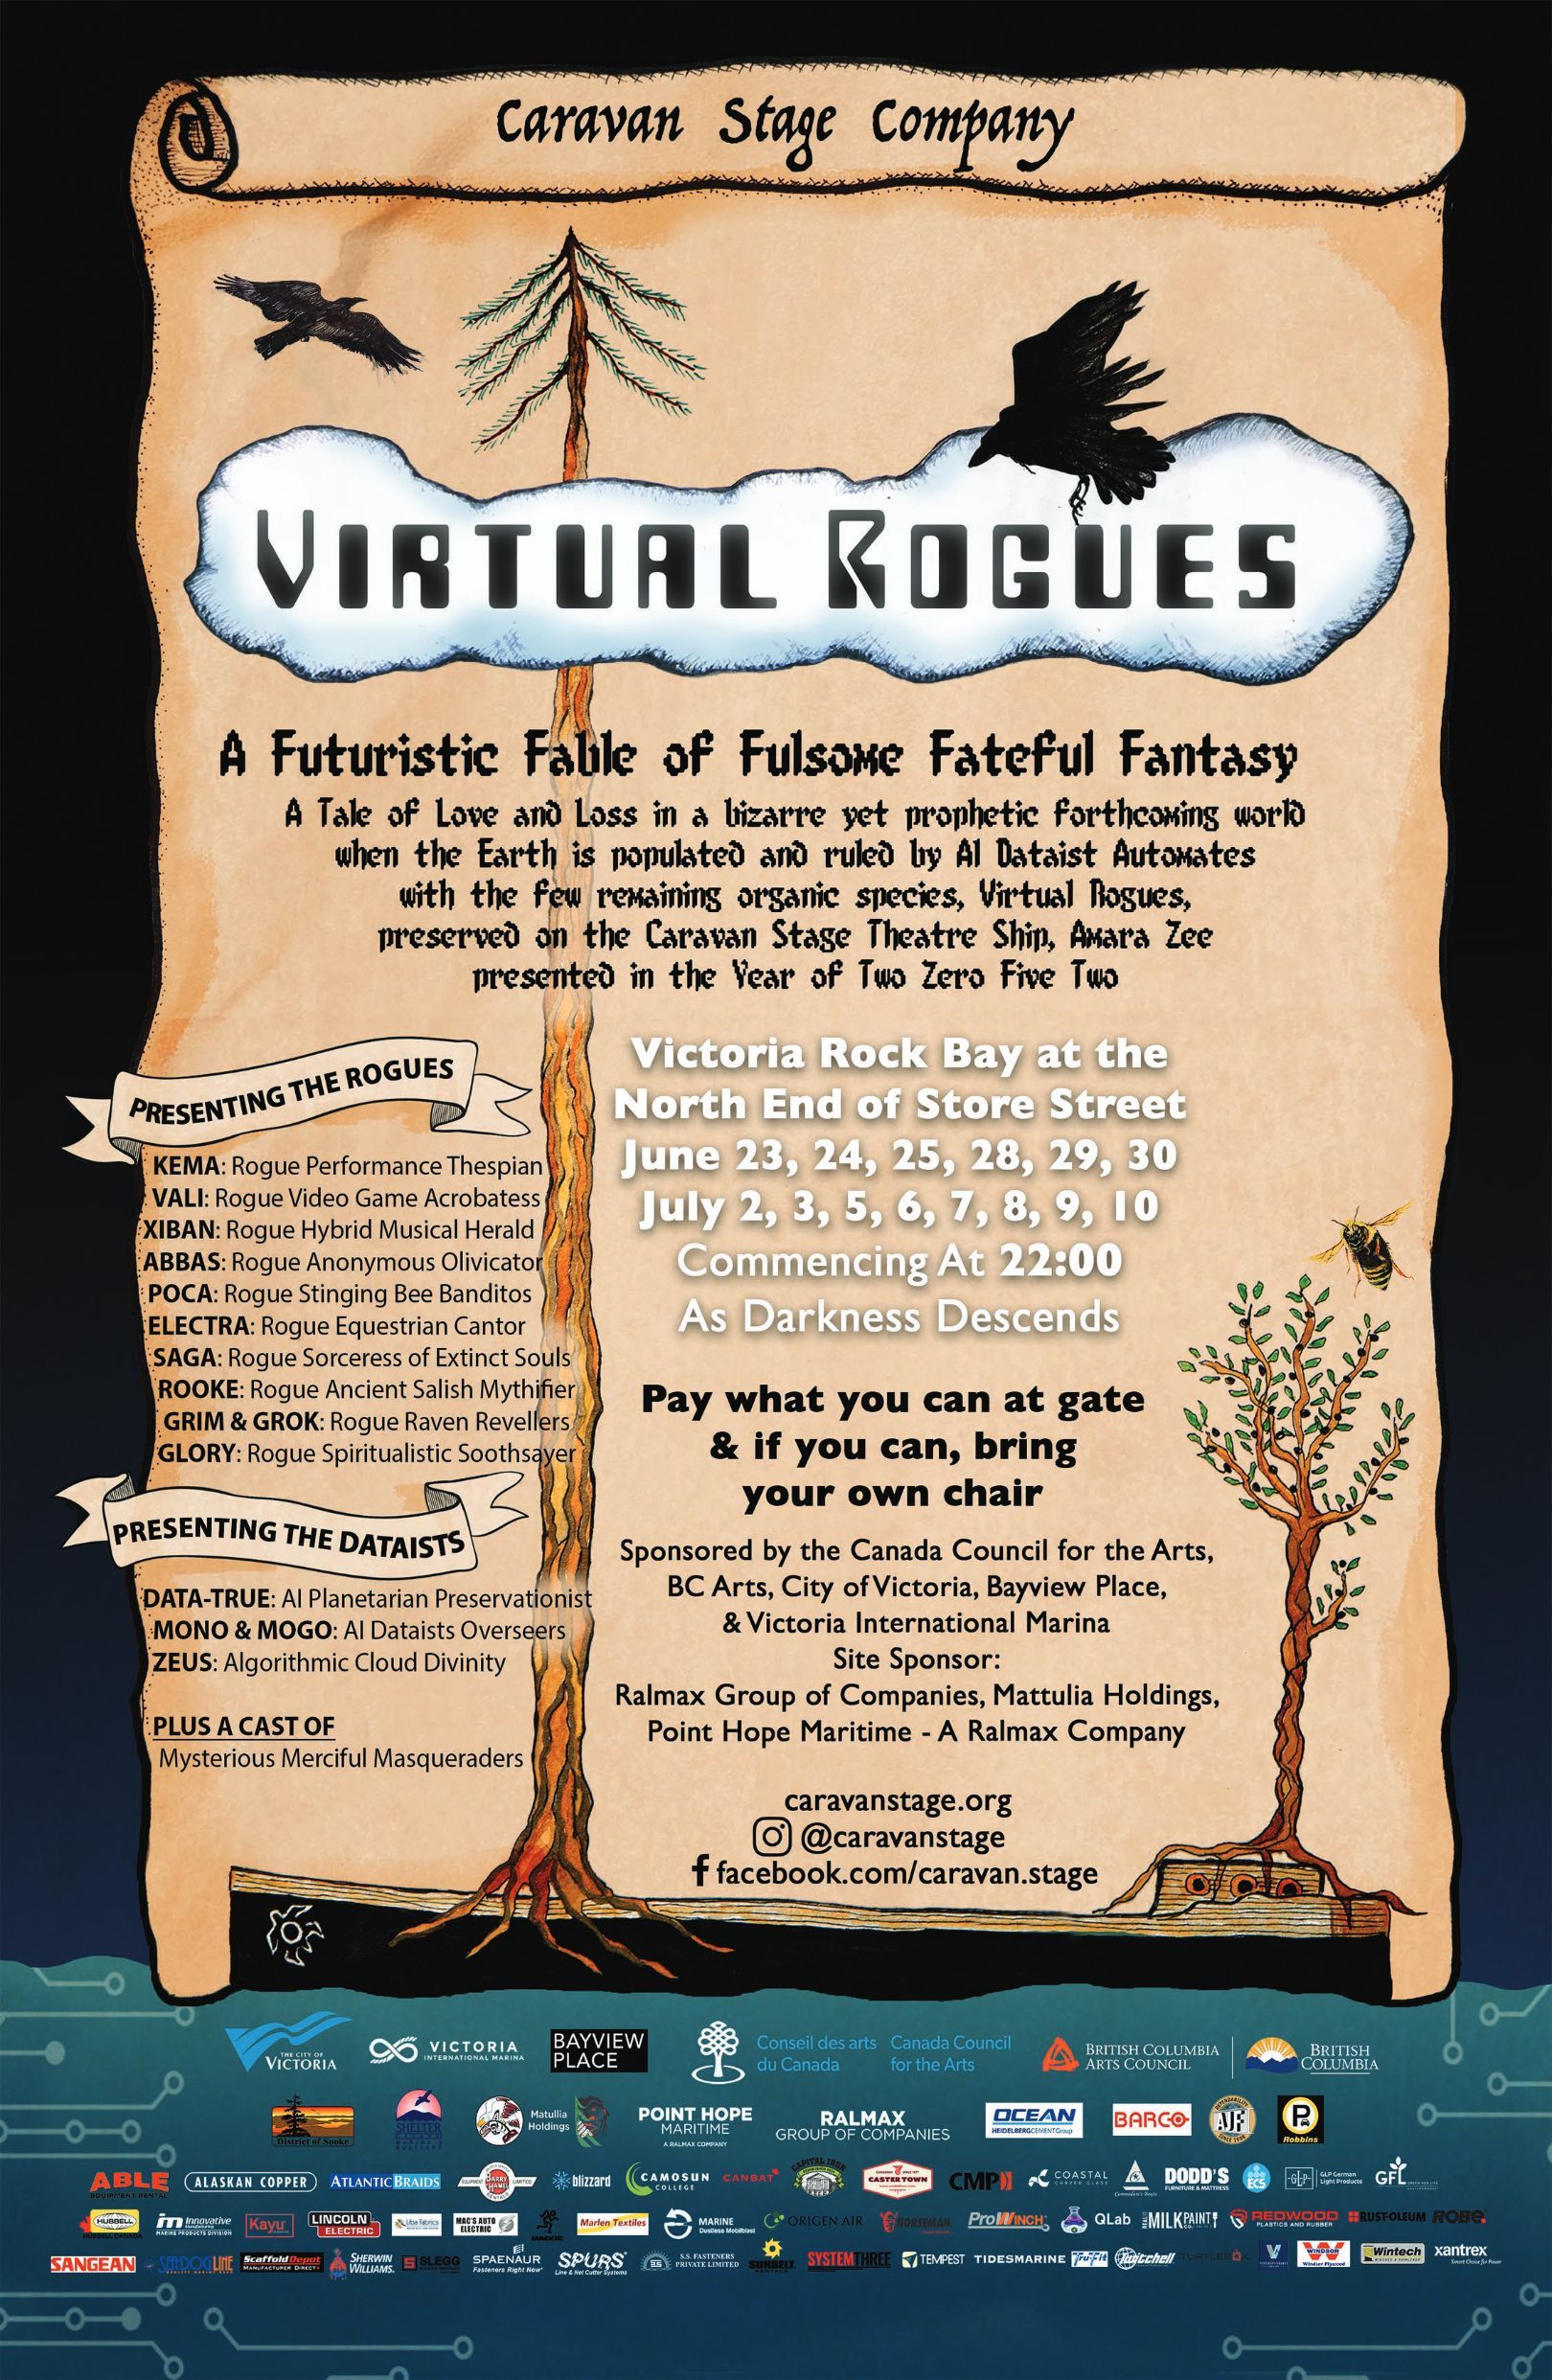 virtual rogues poster 11x17-compressed